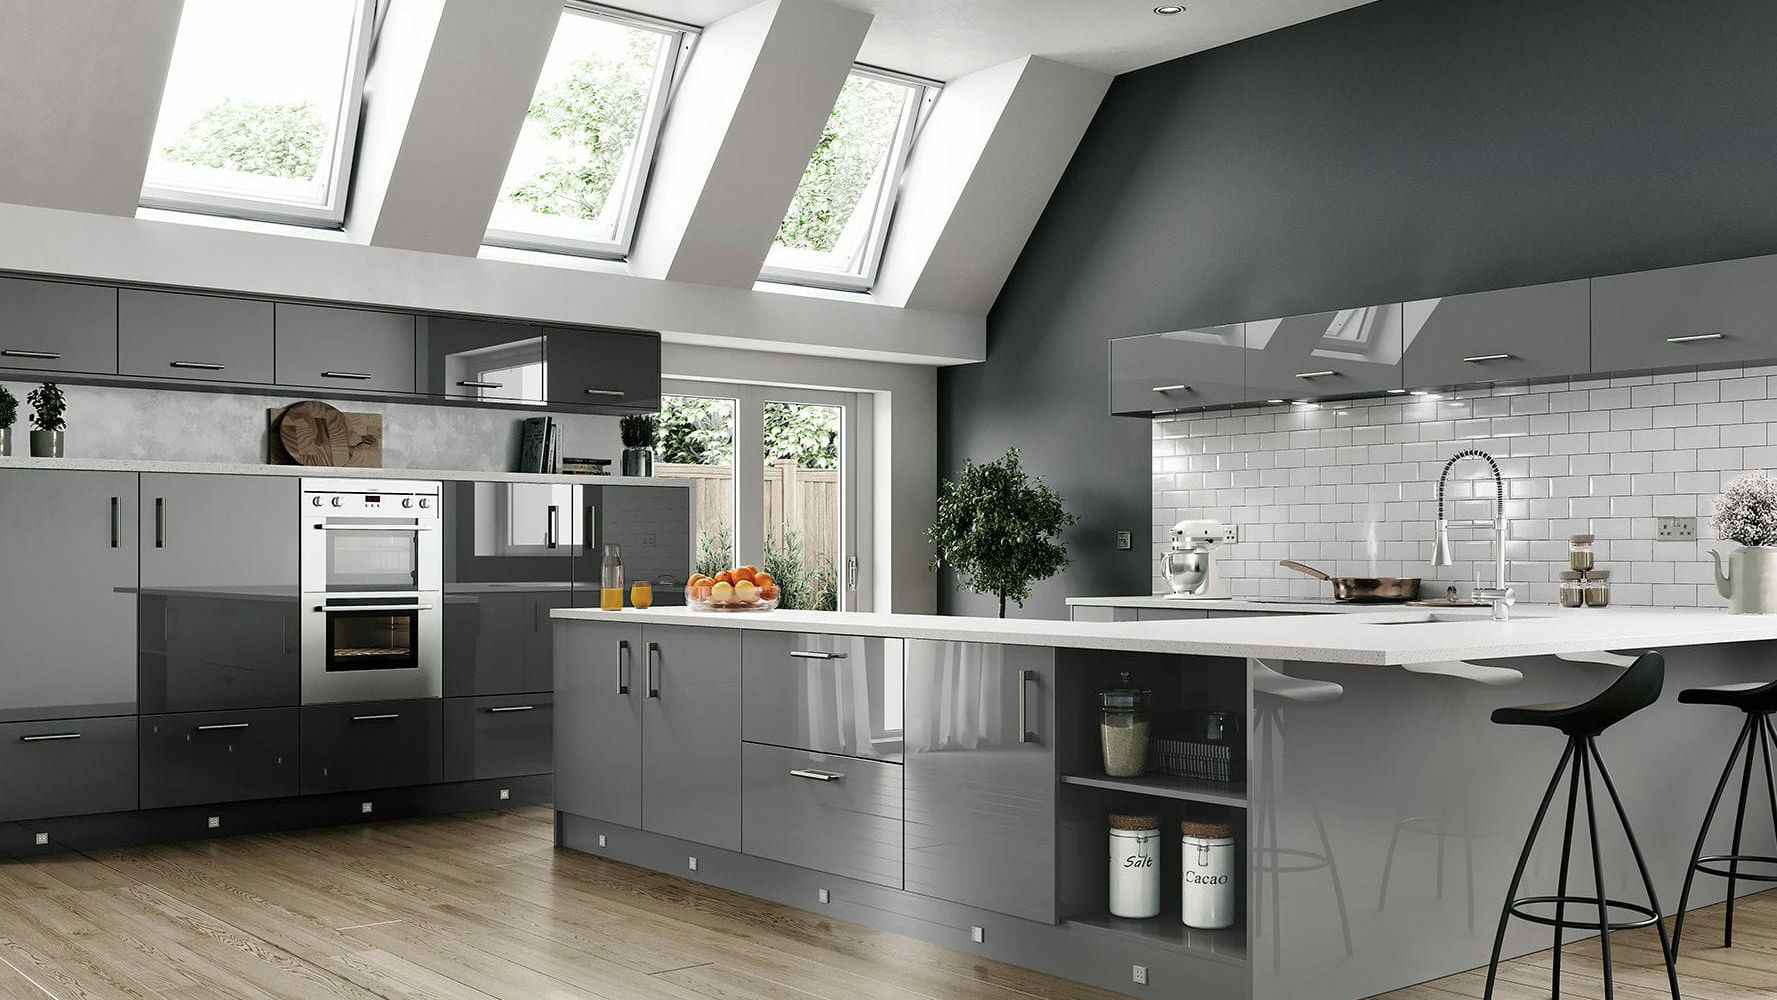 High gloss dust grey kitchens with a reflective finish that adds depth and modernity to the space